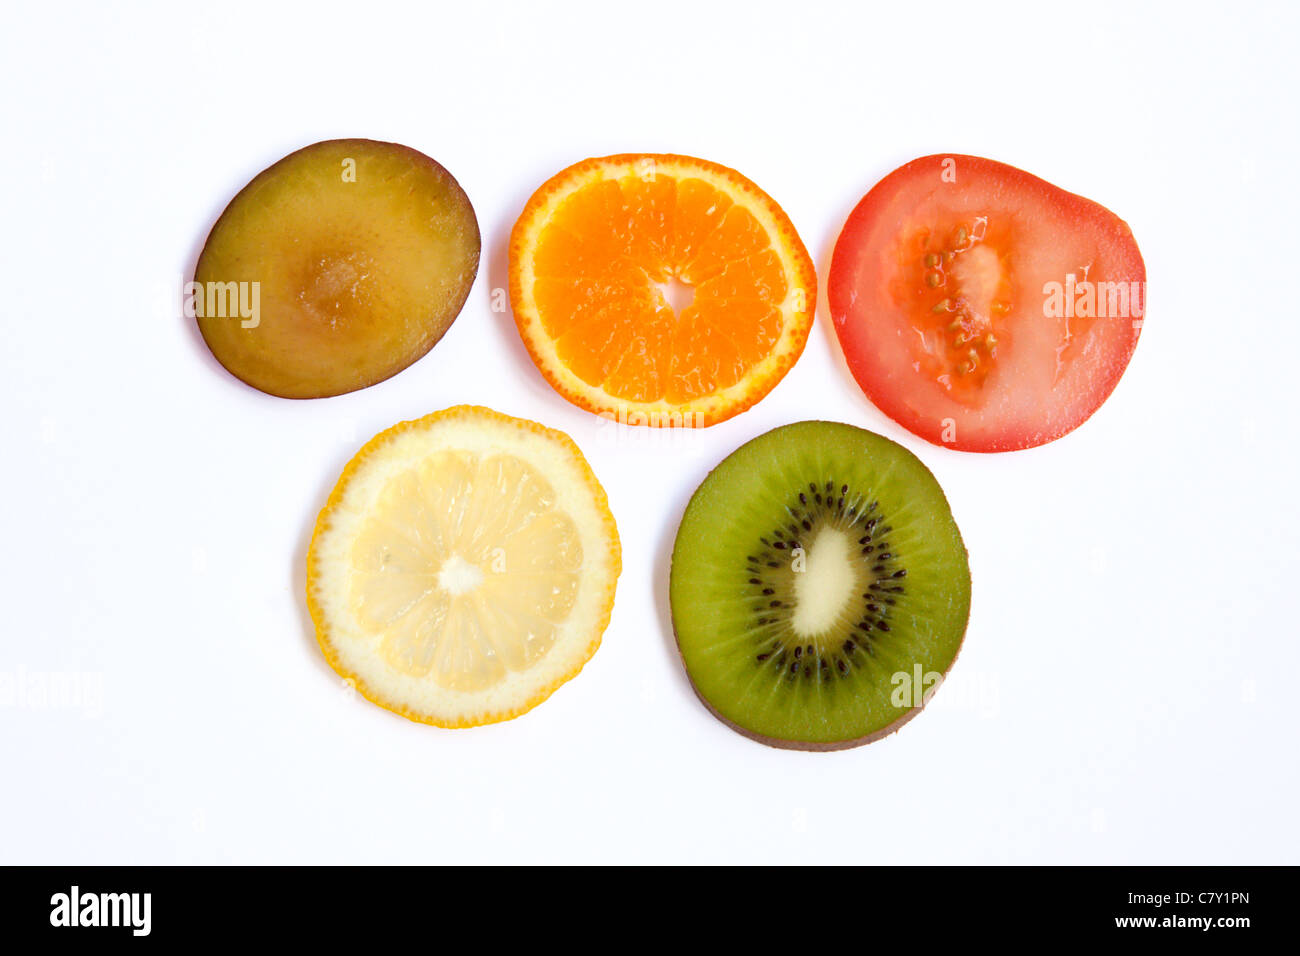 Olympic symbol made out of 5 pieces of fruit Stock Photo